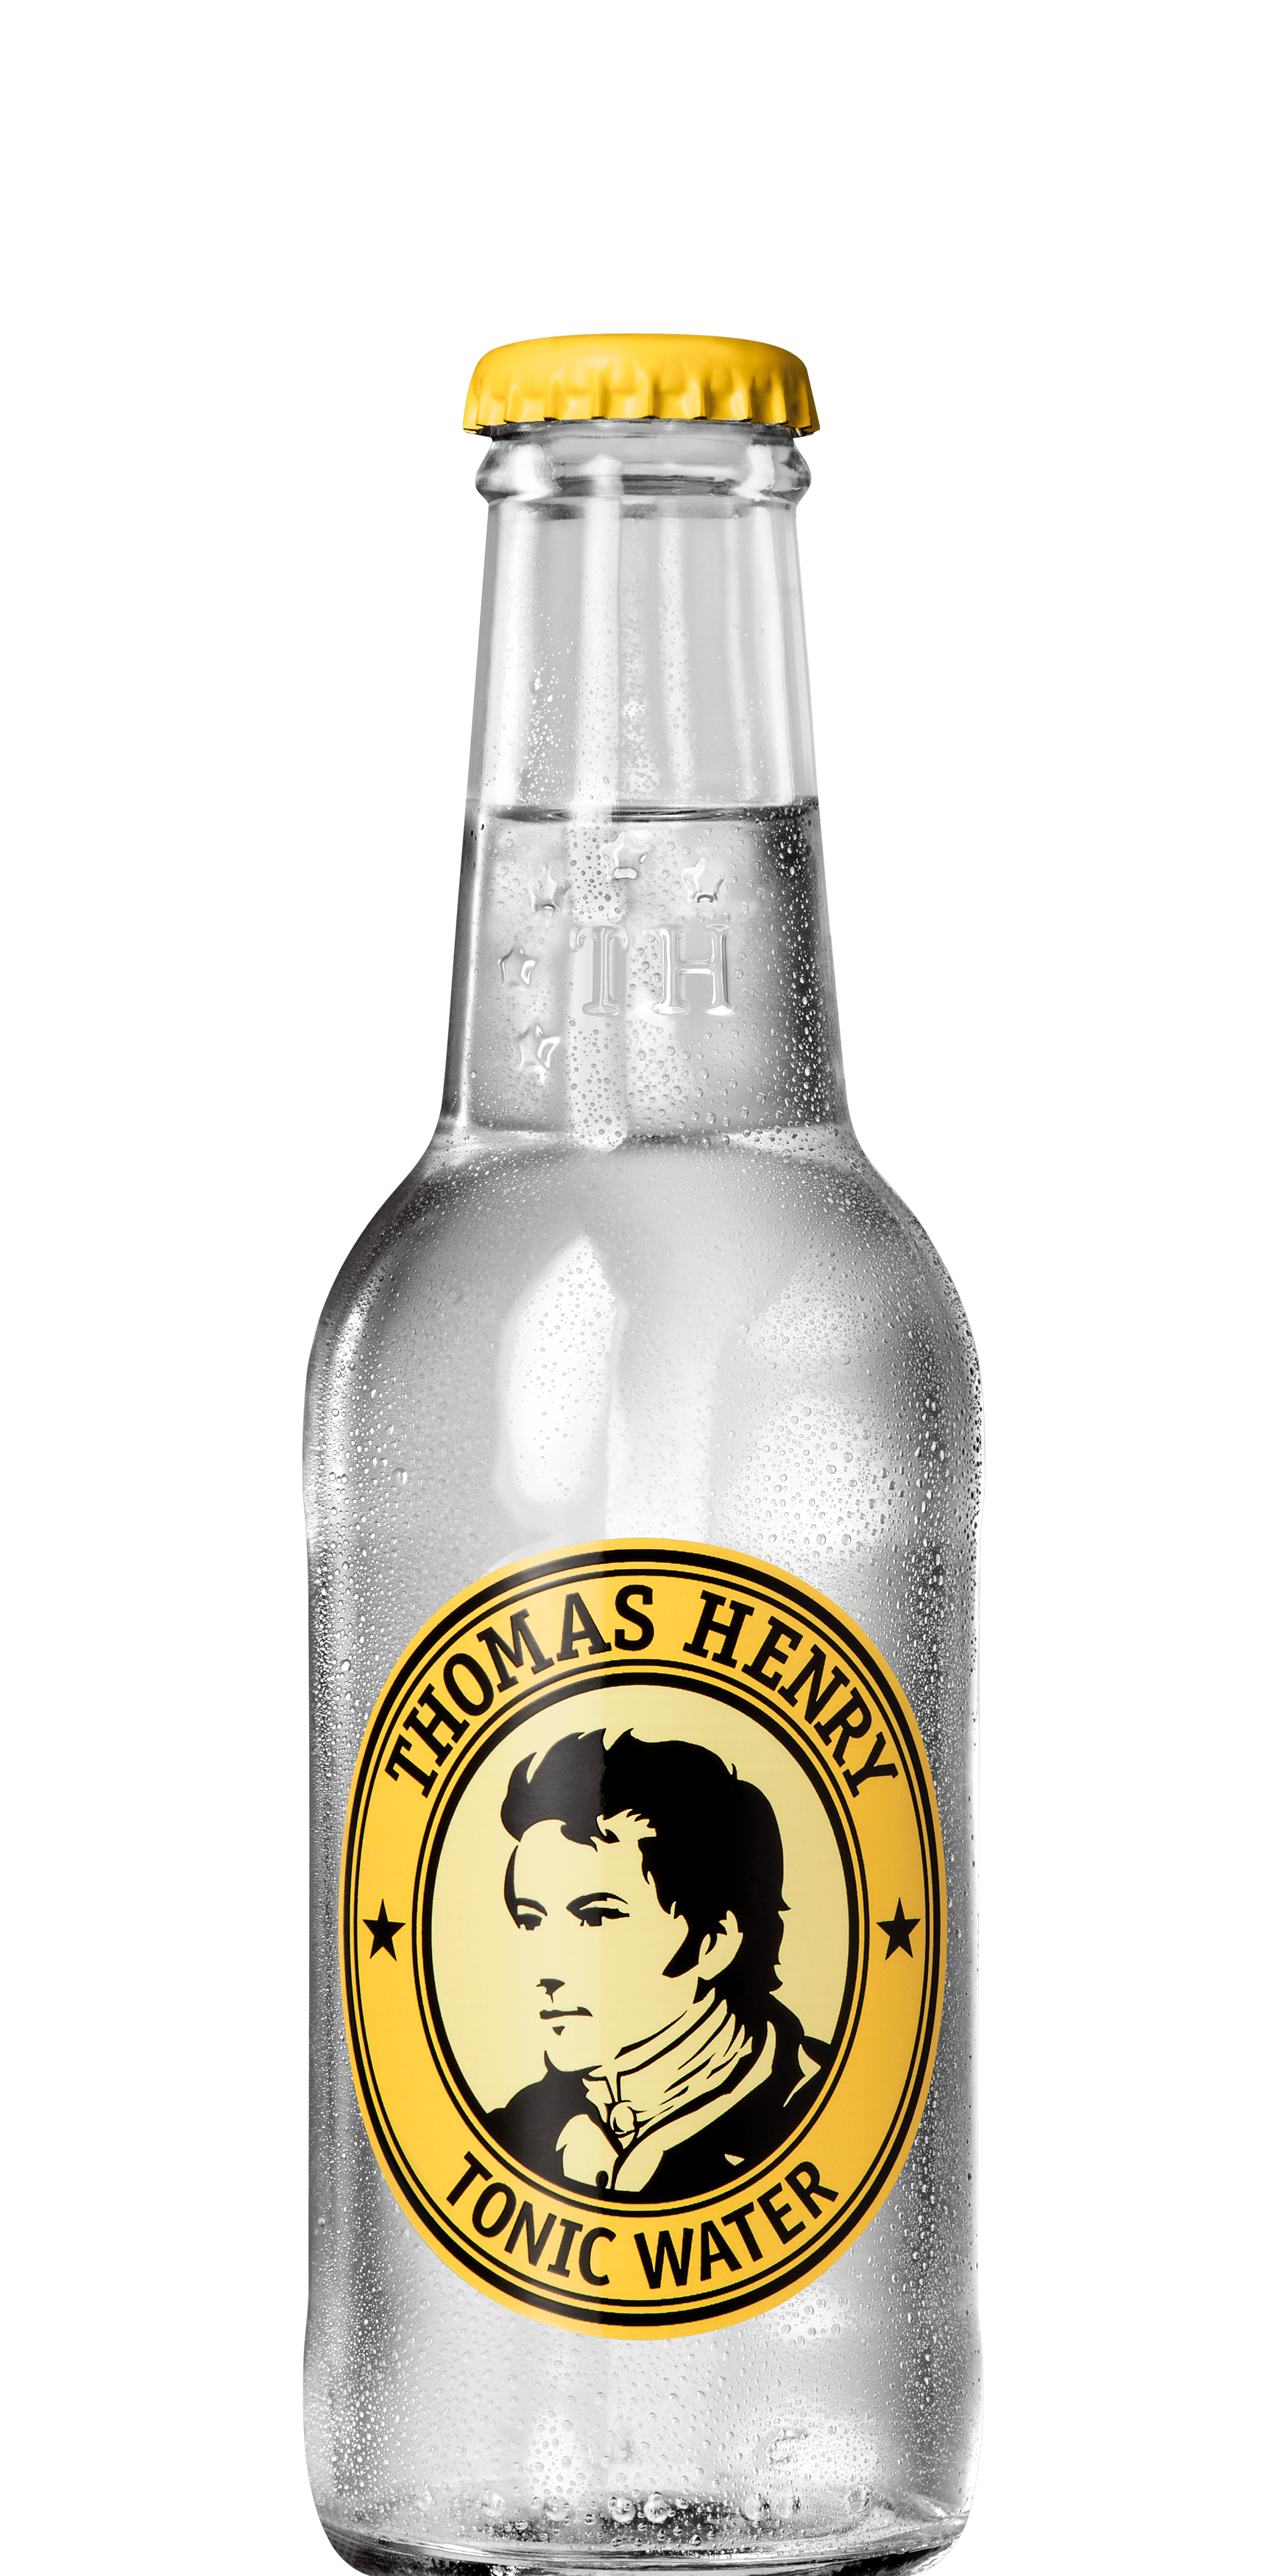 Thomas-Henry_Tonic-Water_200ml-glass-3500h.png